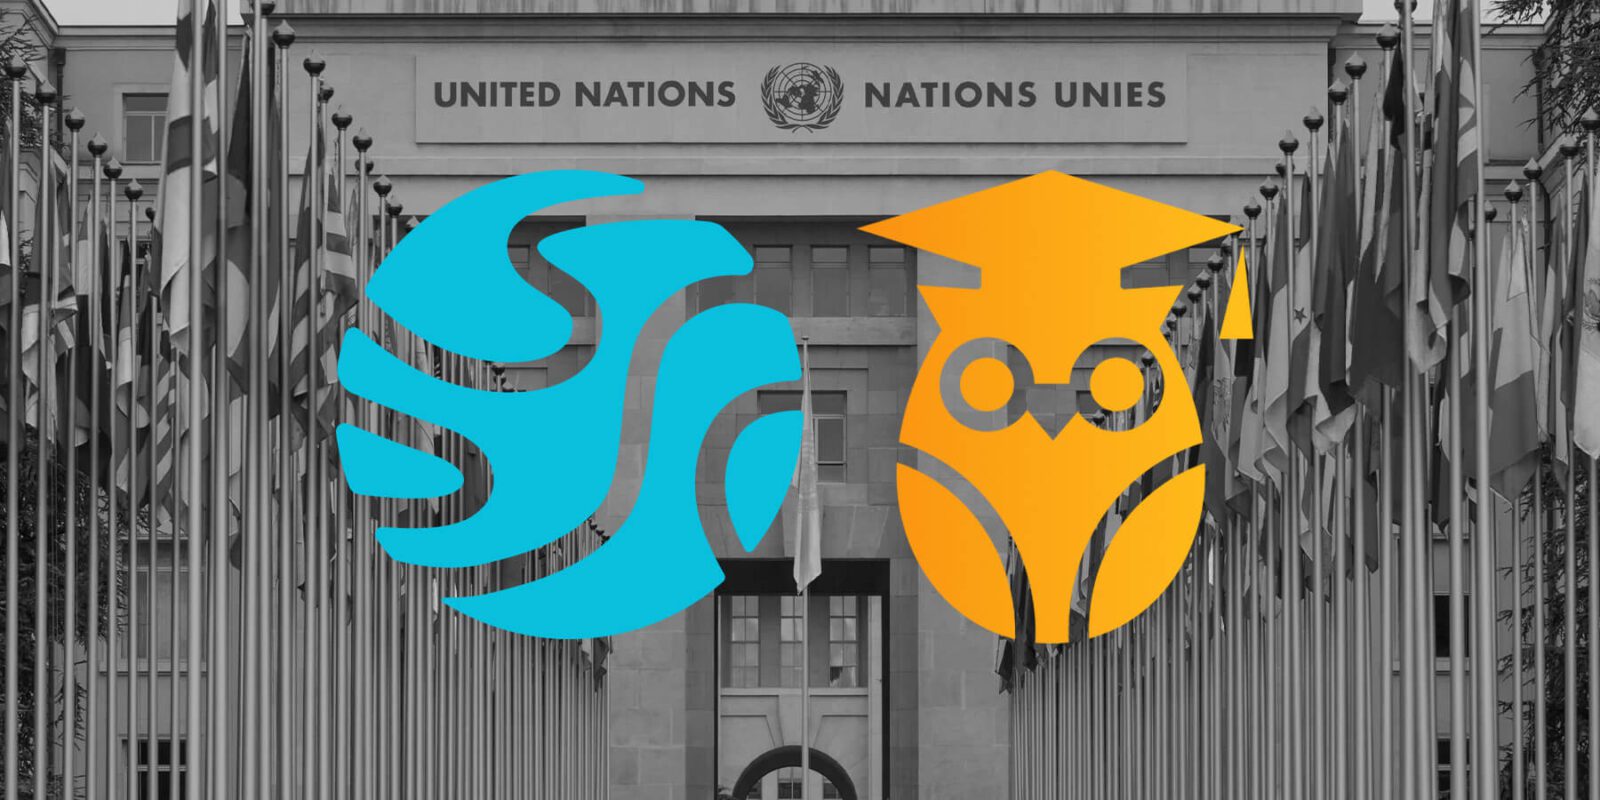 United Nations Nations Unies building with IGA and Rumie Initiative logo